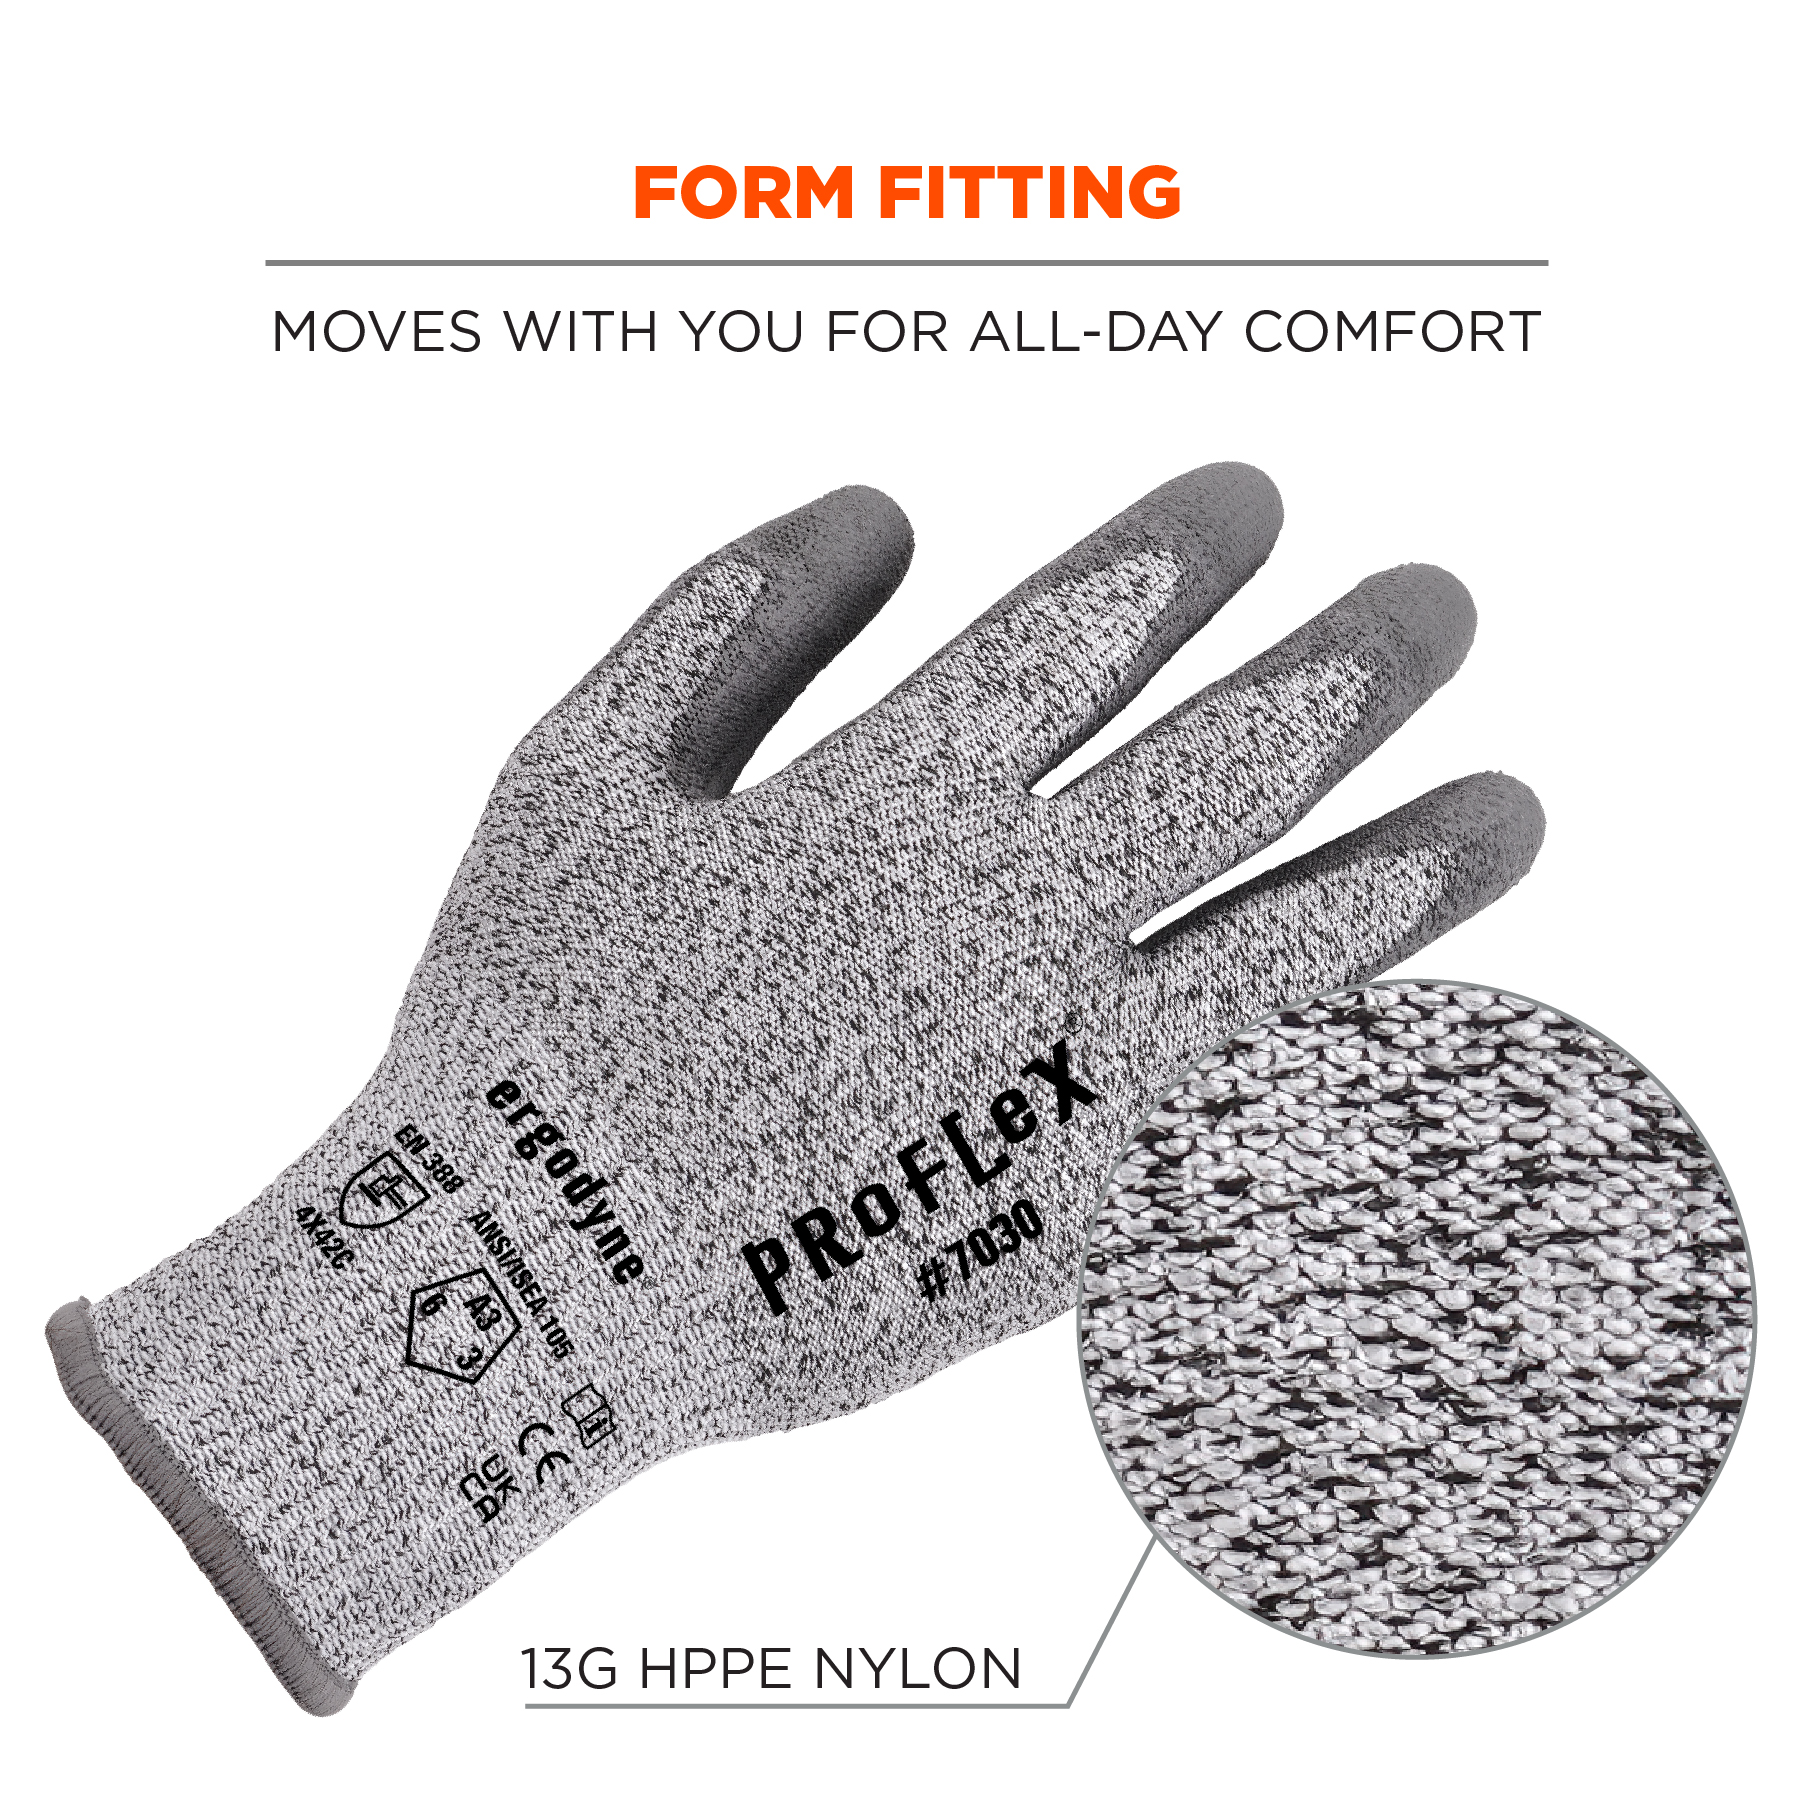 https://www.ergodyne.com/sites/default/files/product-images/10462-7030-ansi-a3-pu-coated-cr-gloves-gray-form-fitting_0.jpg